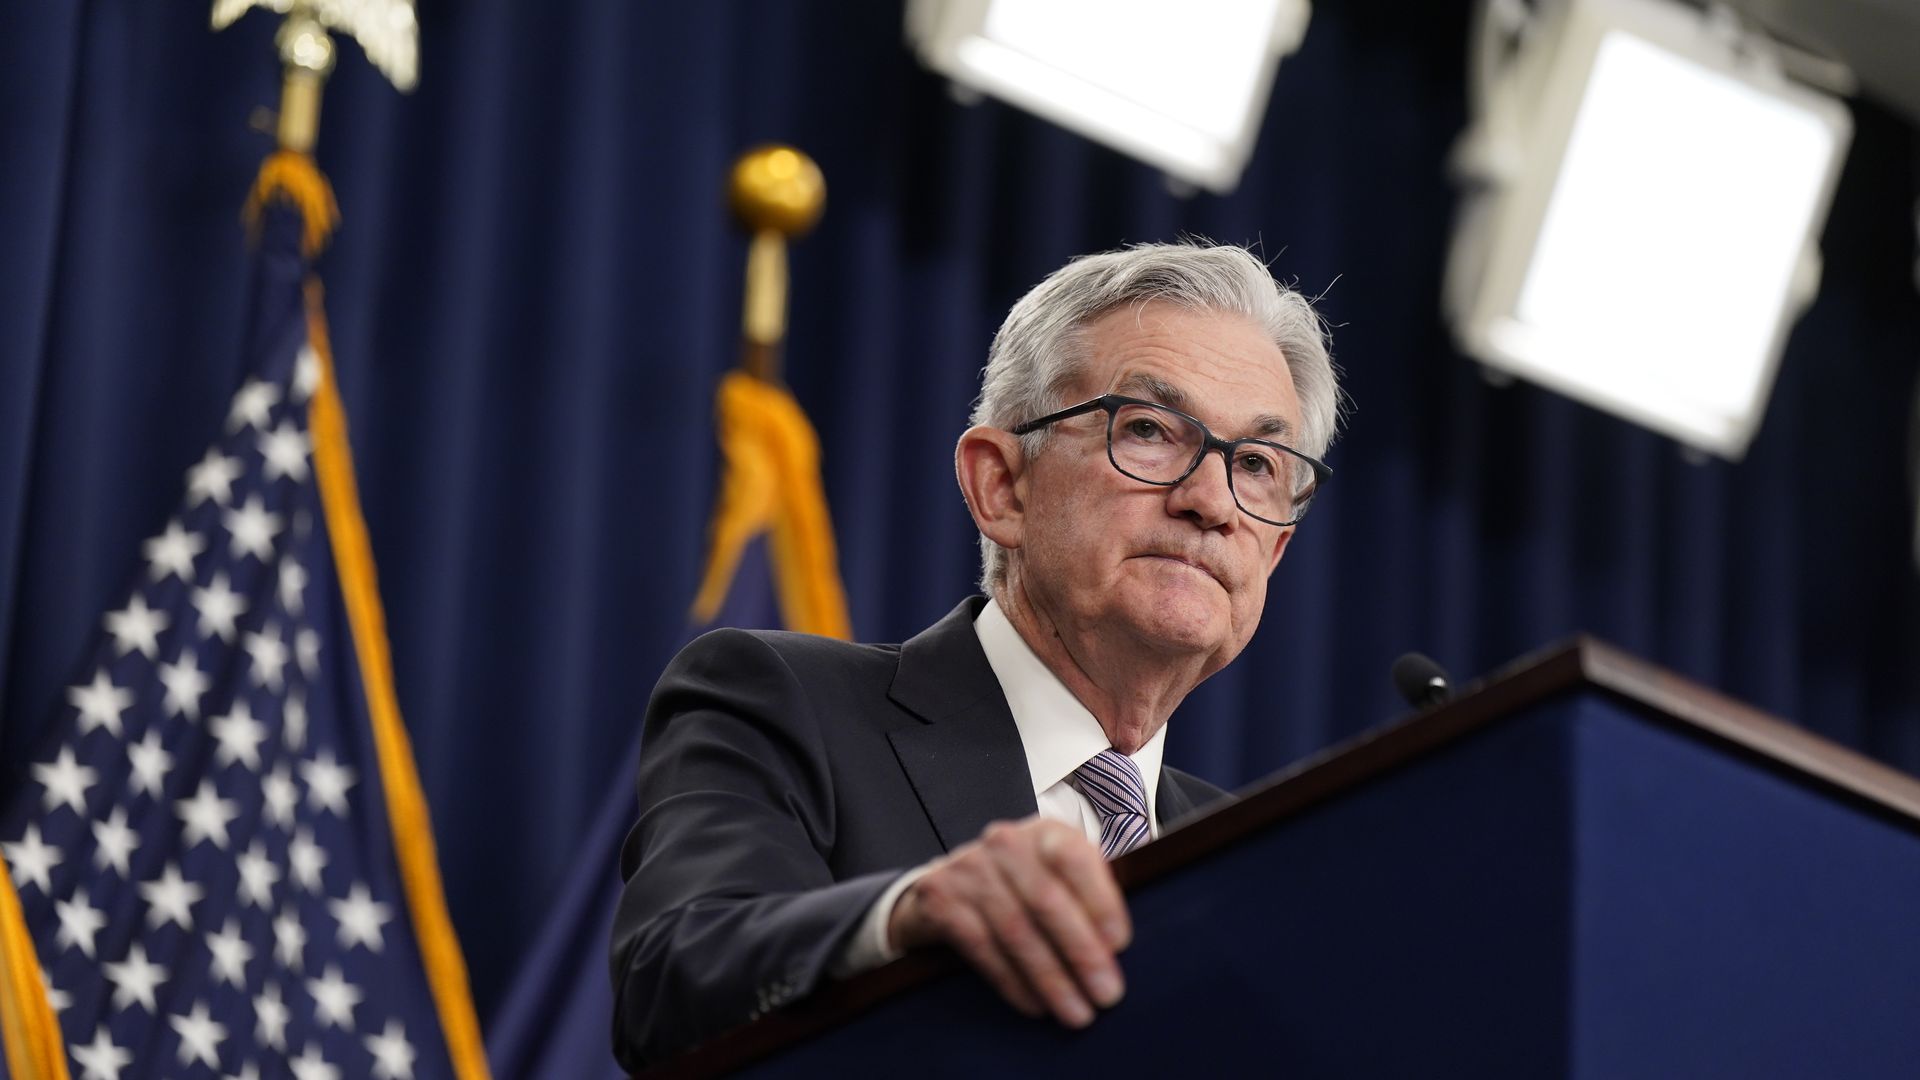 Fed chairman Jerome Powell stands at a podium at a news conference 